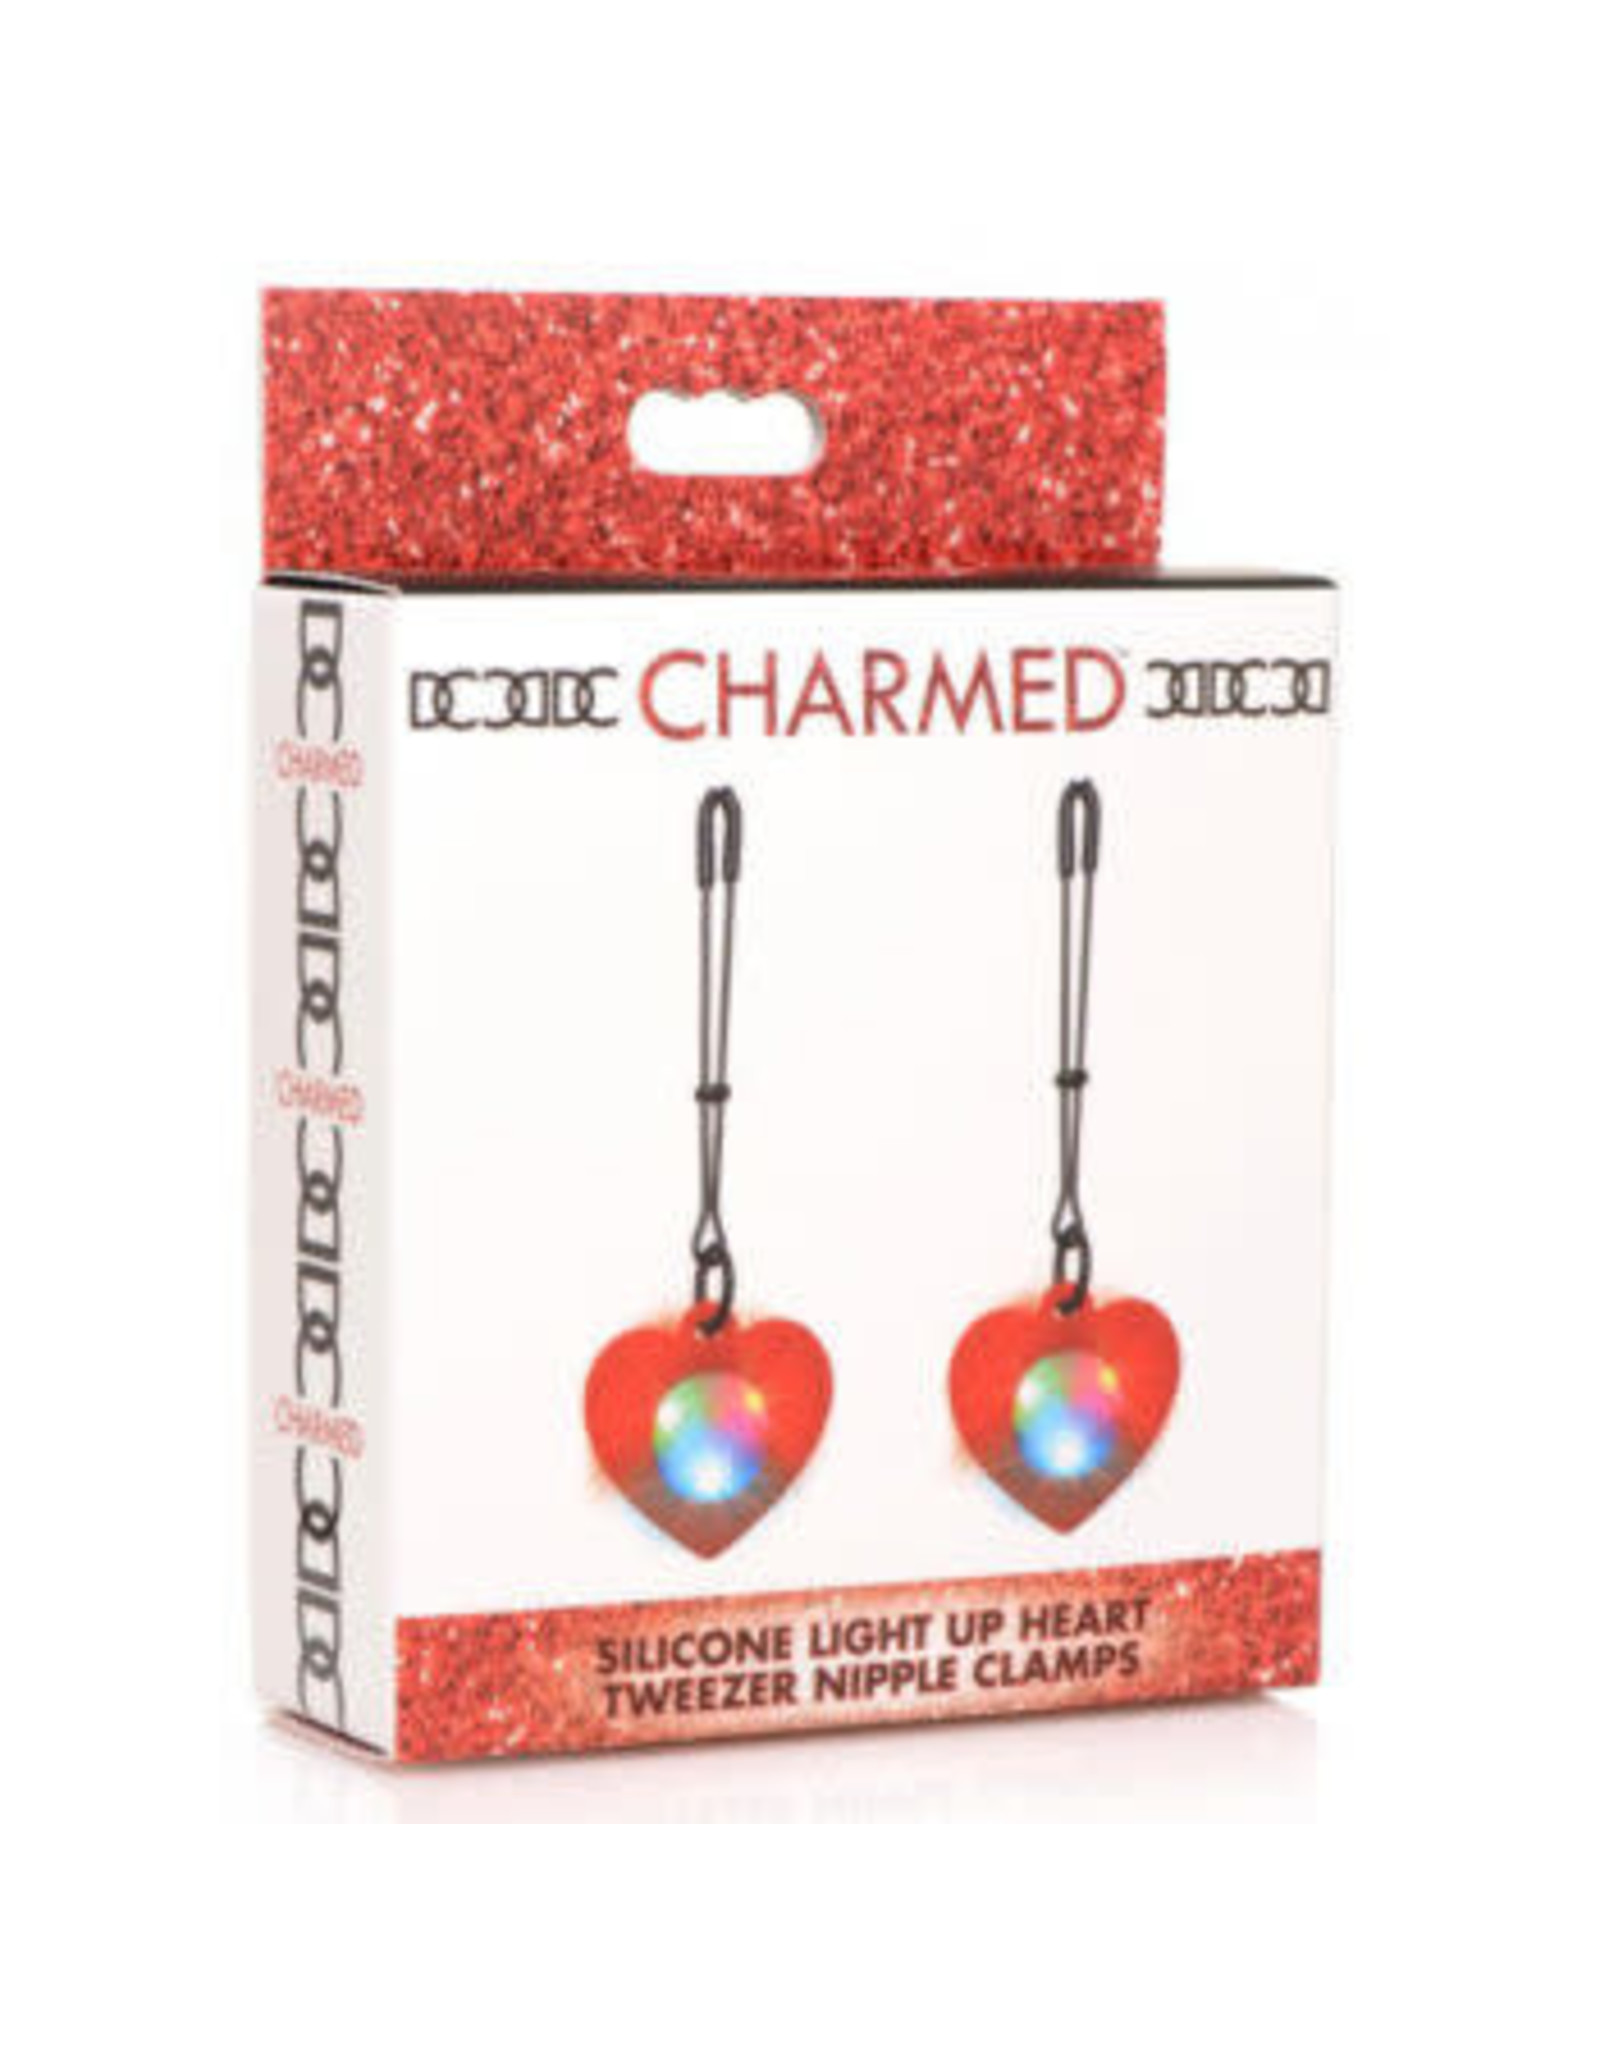 XR BRANDS CHARMED SILICONE LIGHT UP HEART TWEEZER NIPPLE CLAMPS